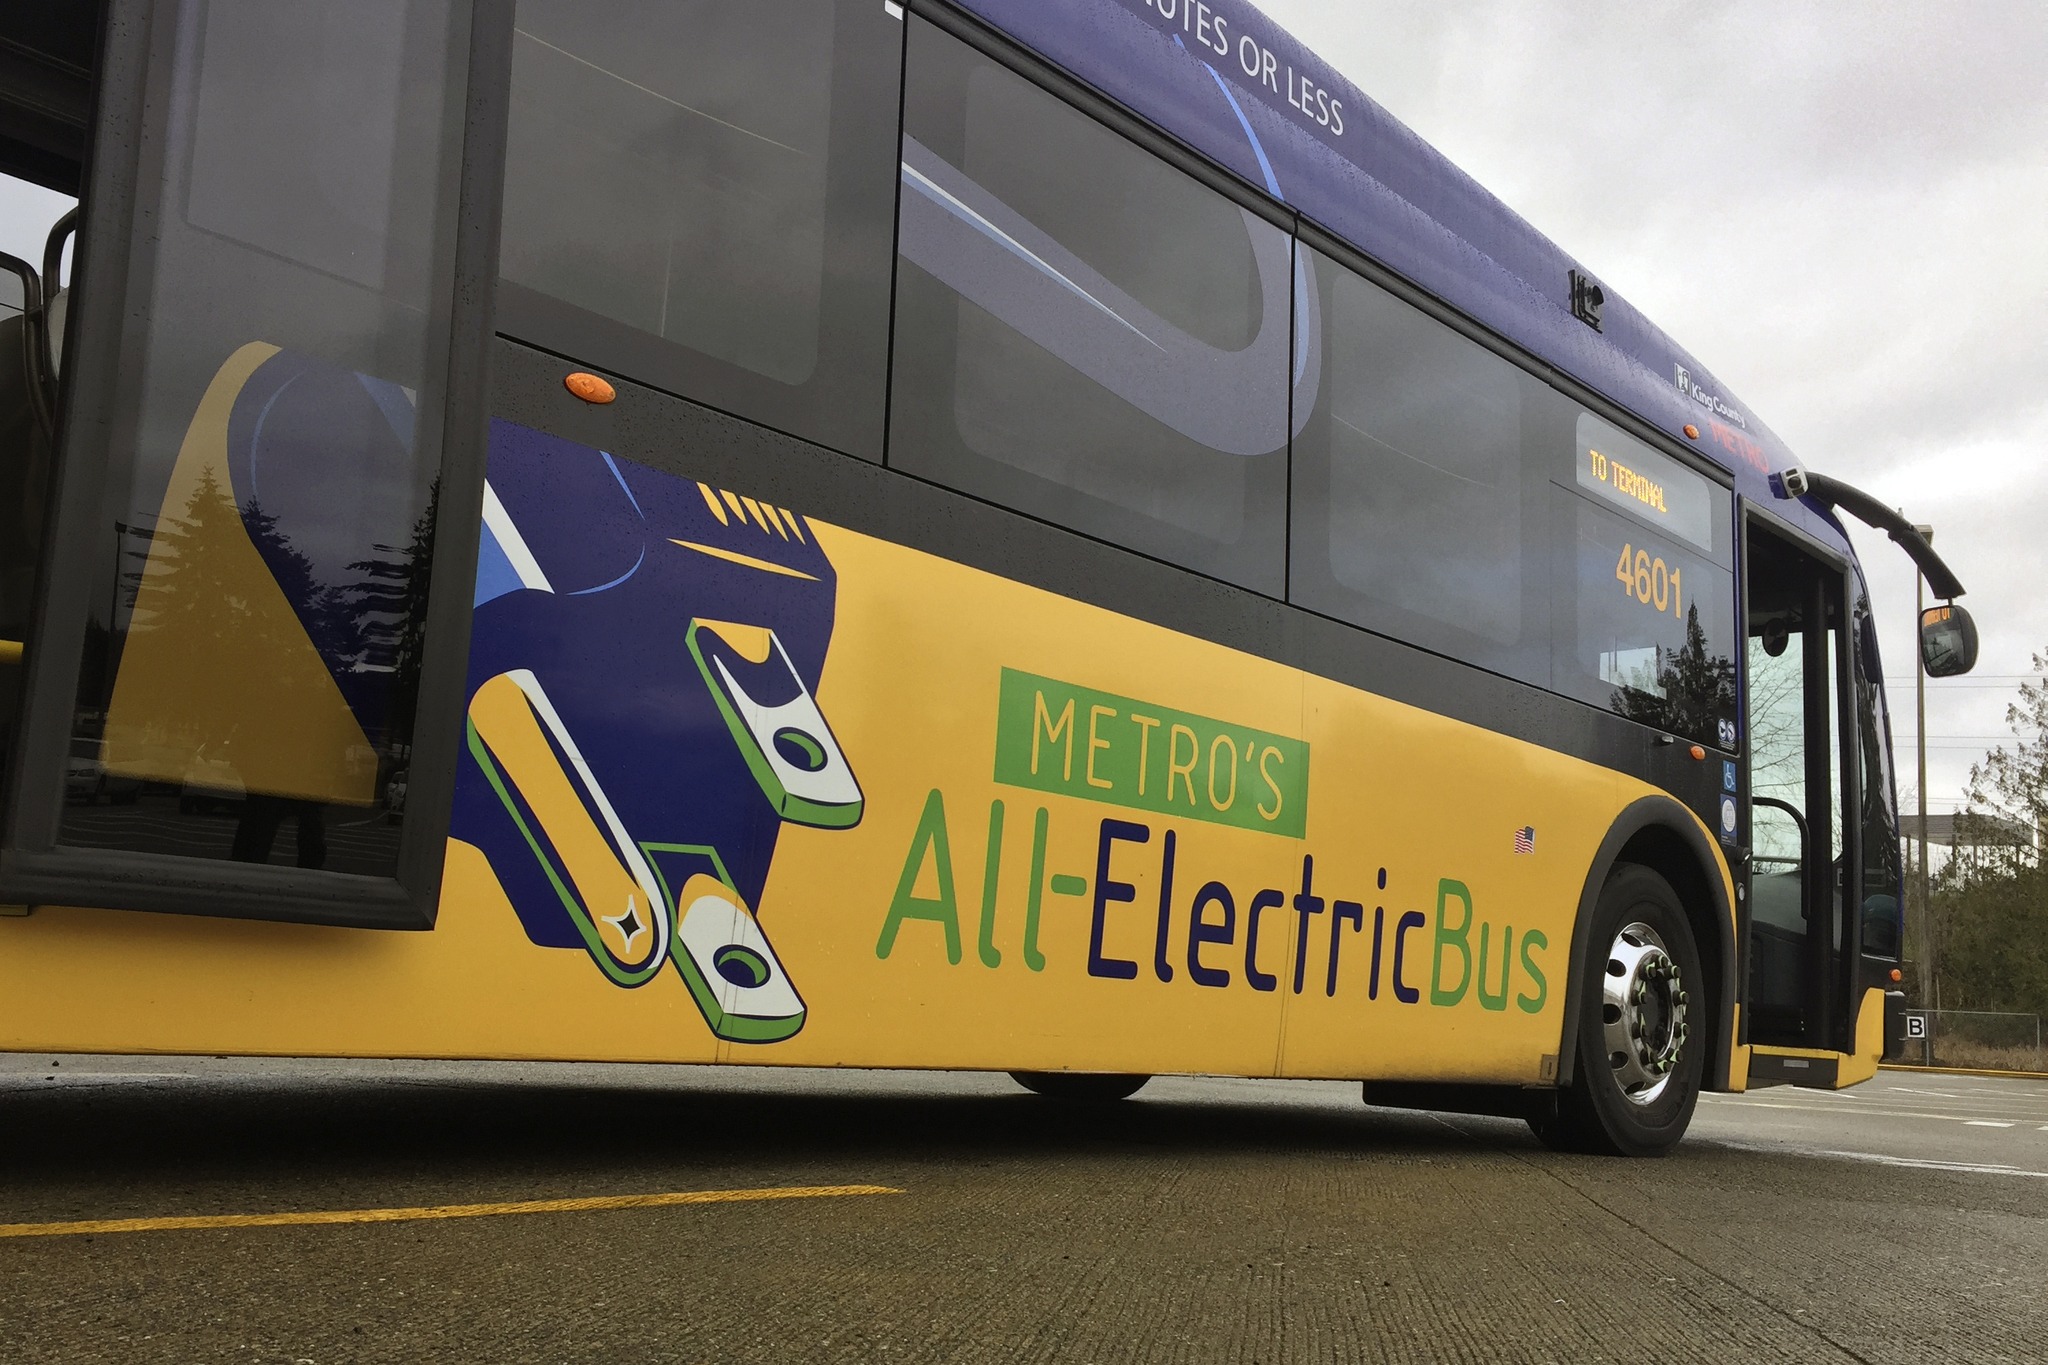 The new battery-powered bus, coming soon to a route near you. Photo courtesy King County.